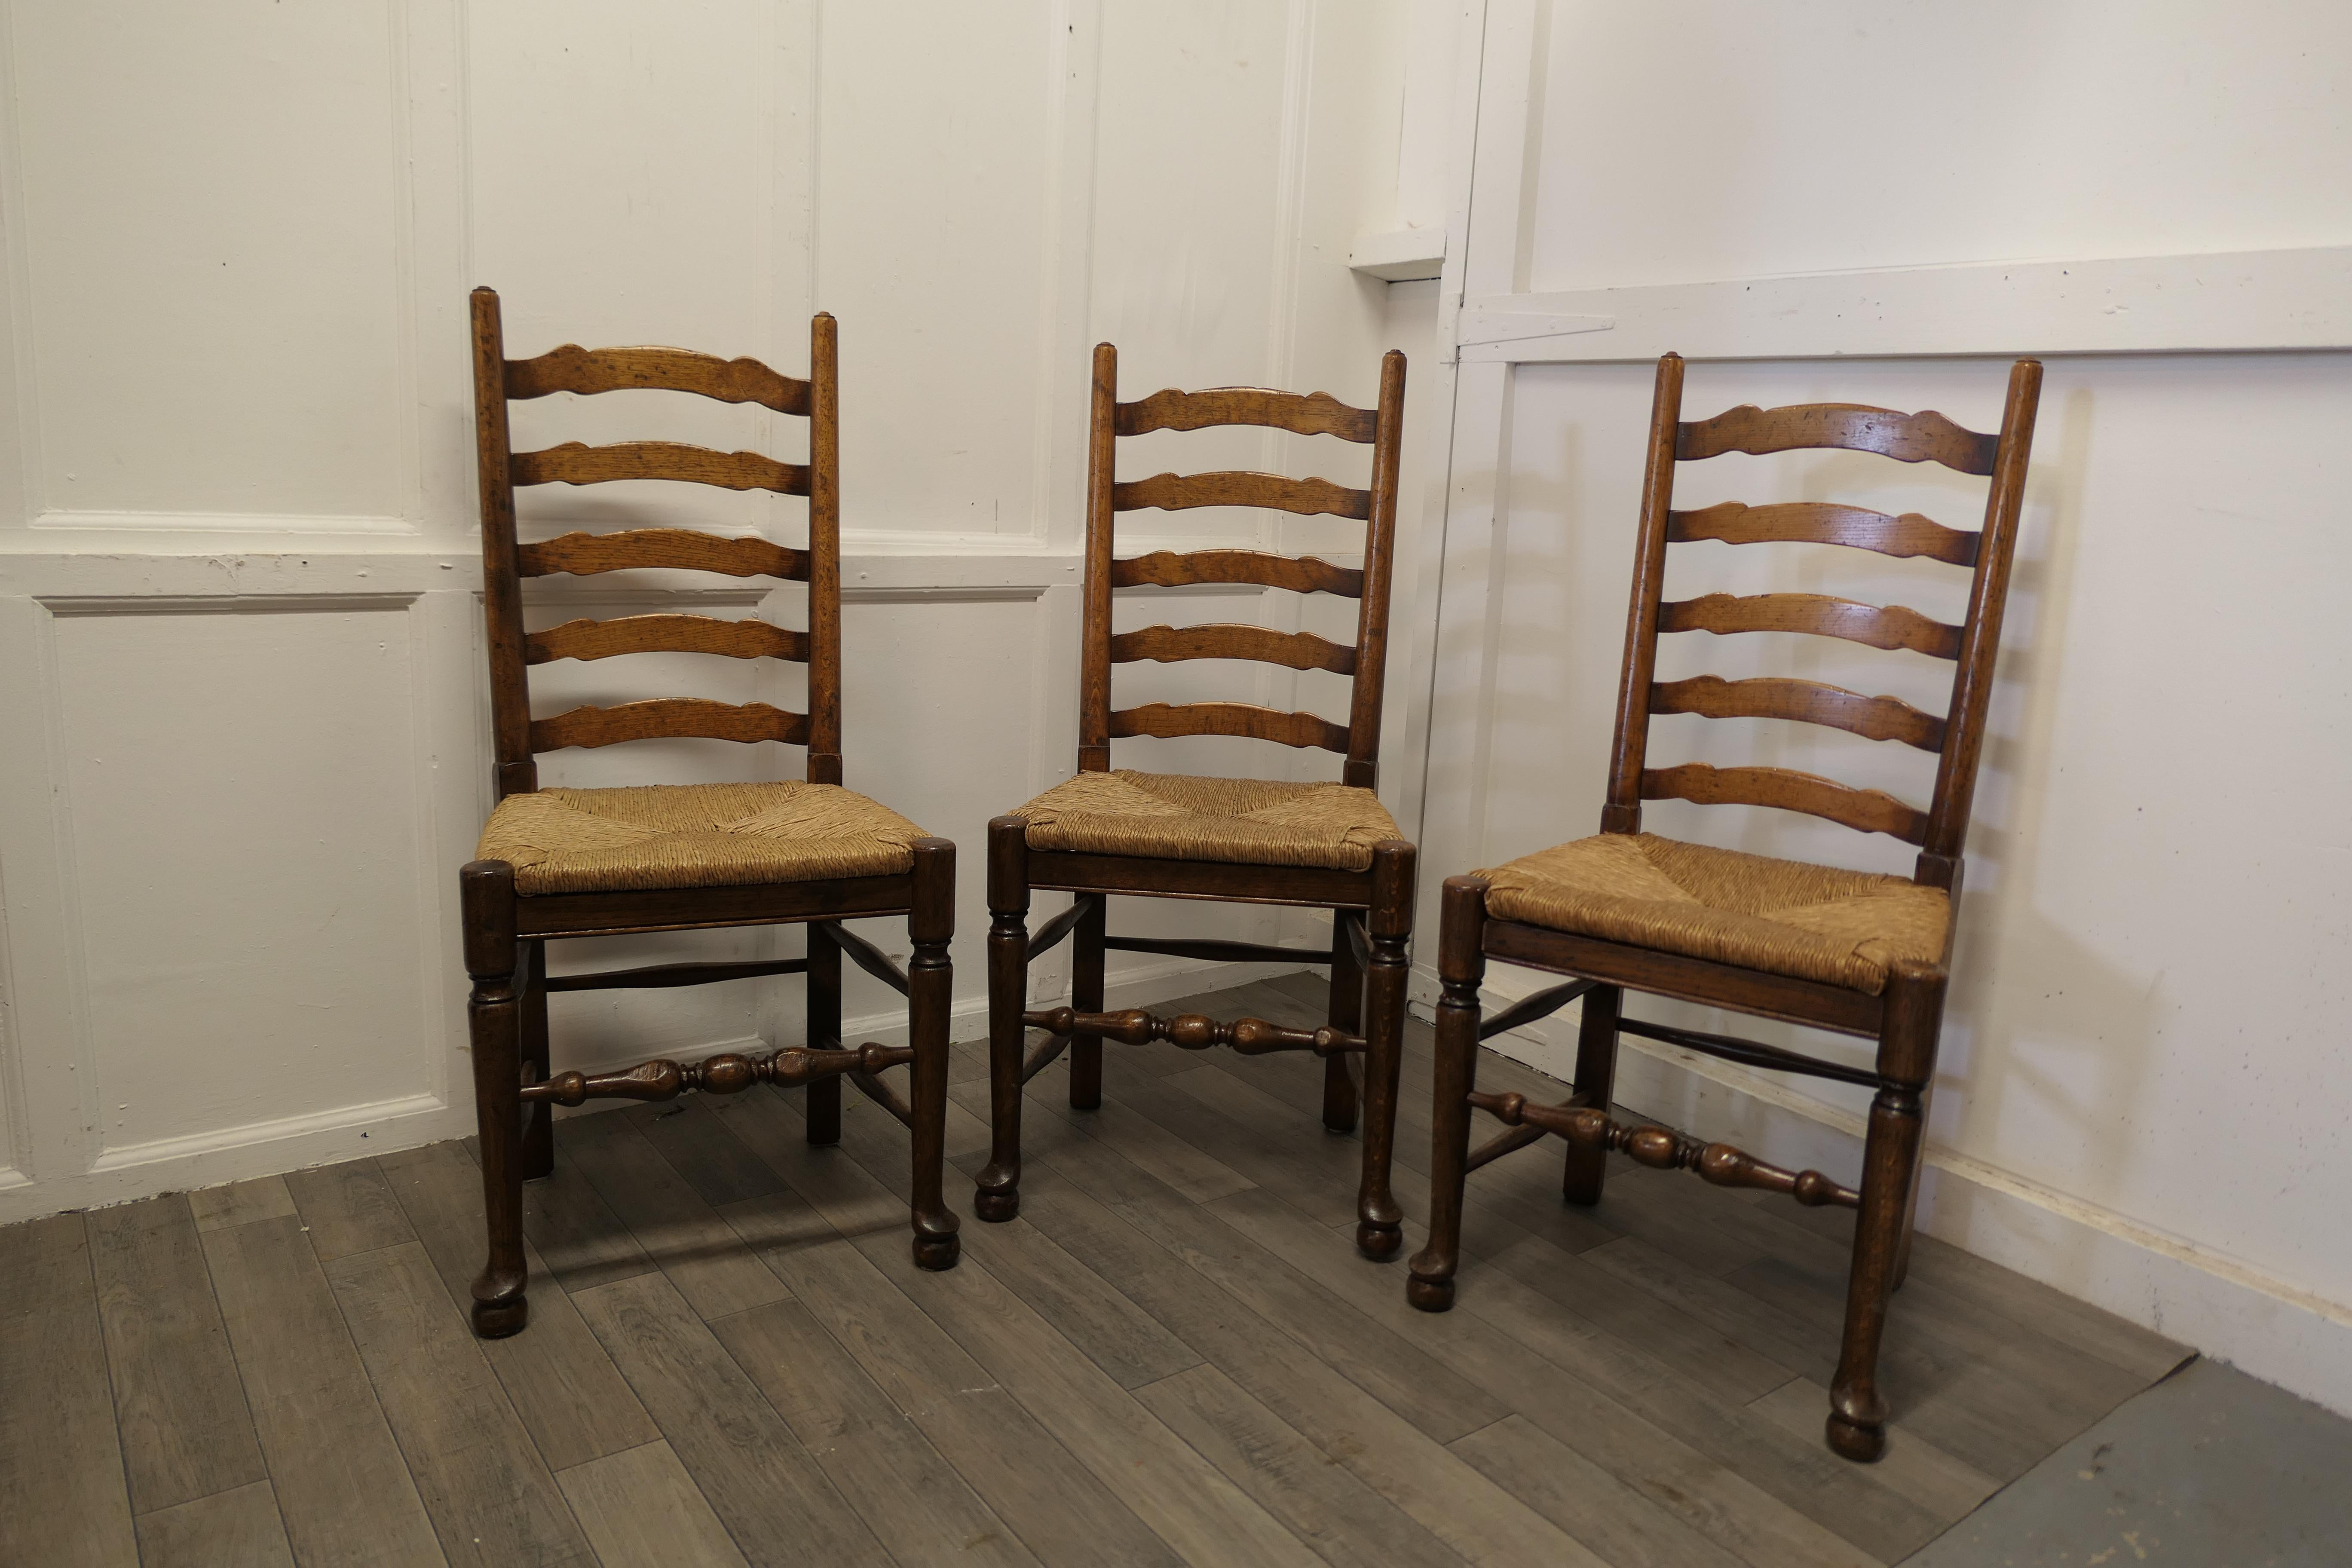 19th century Set of 3 farmhouse ladder back dining chairs.

This very attractive set of heavy Oak chairs with a wavy ladder back in the Georgian style, with turned stretchers and chunky pad feet
The chairs have a delightful country look with a